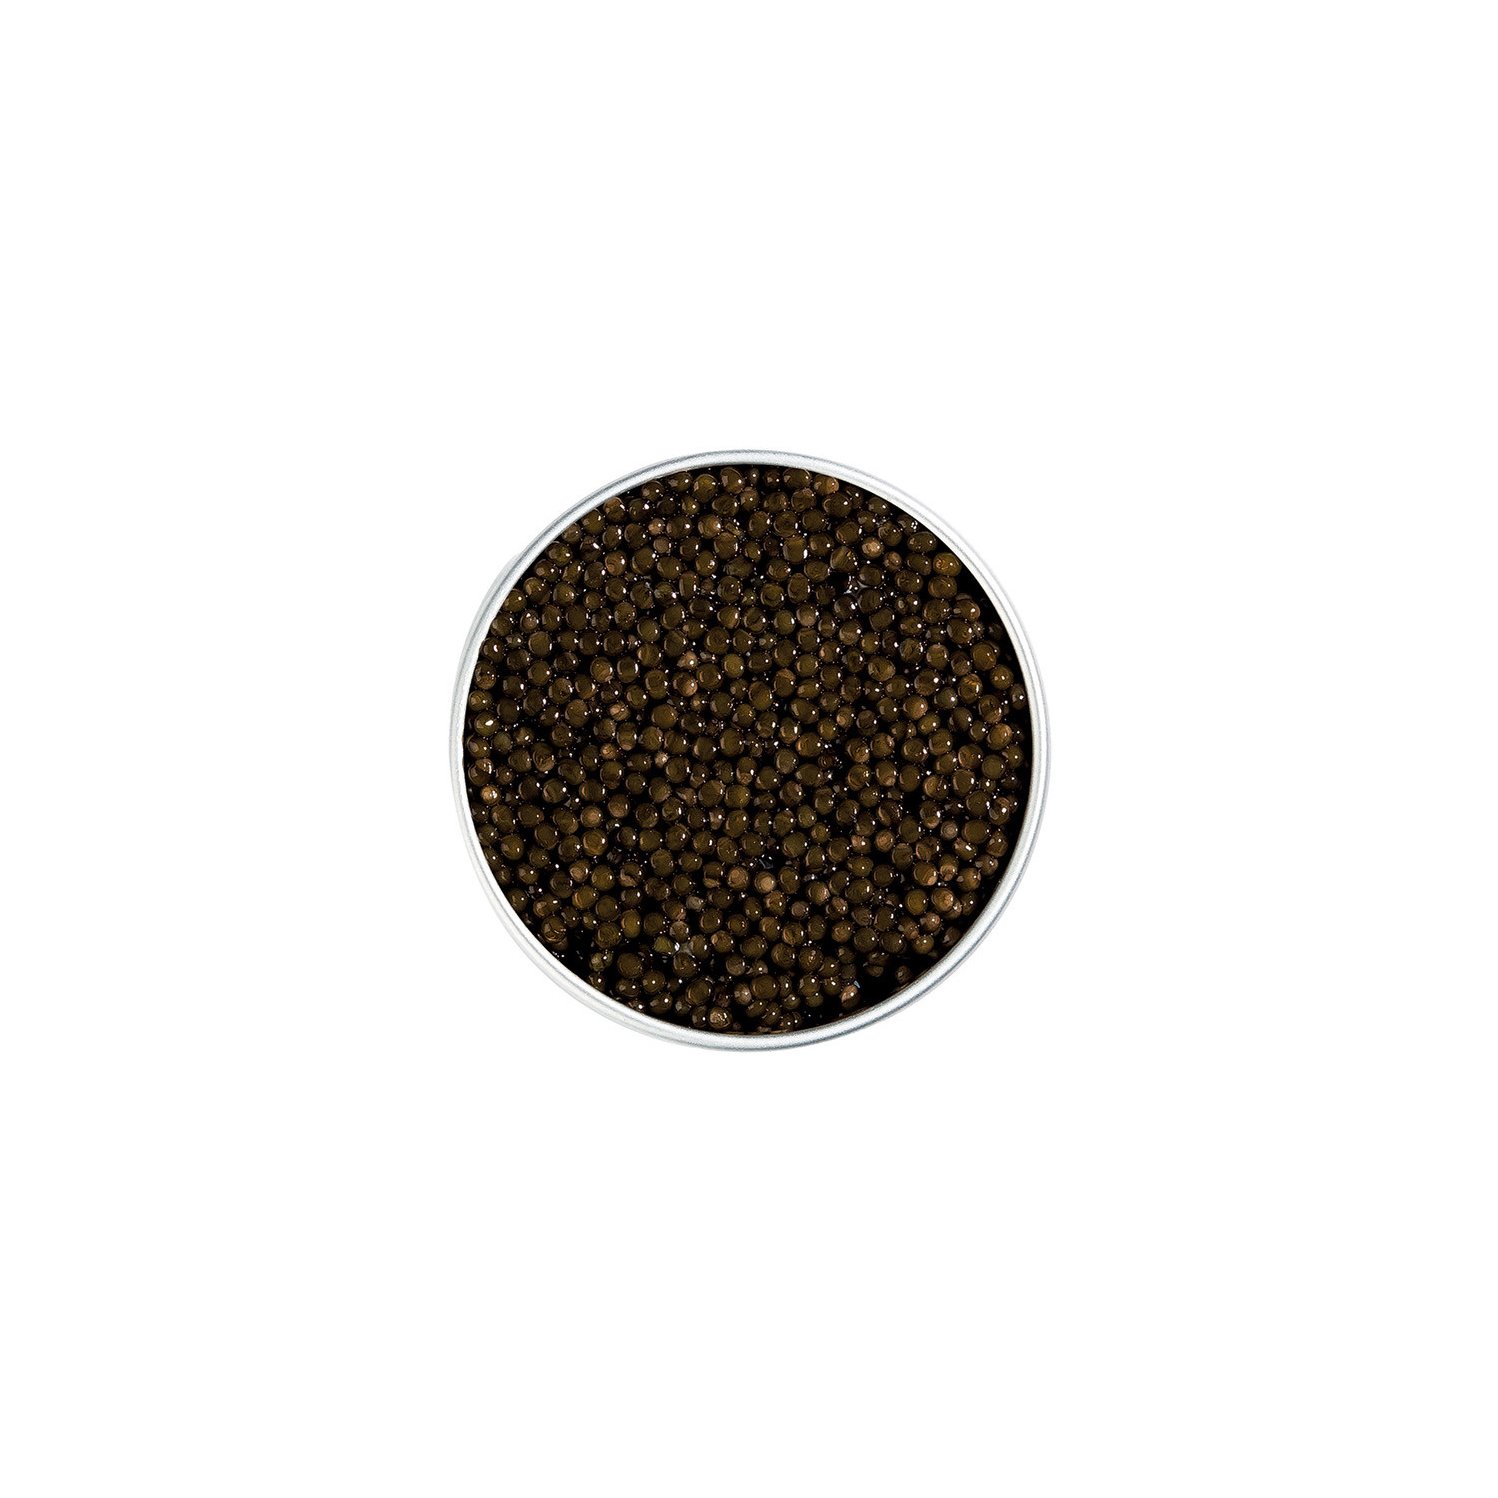 Mia restaurant - Prunier Baerii Caviar Français Made from young acipenser  baeri sturgeon, this caviar has a delicate texture and small, supple amber  grains. Its iodine structure, discreet but complex, will introduce